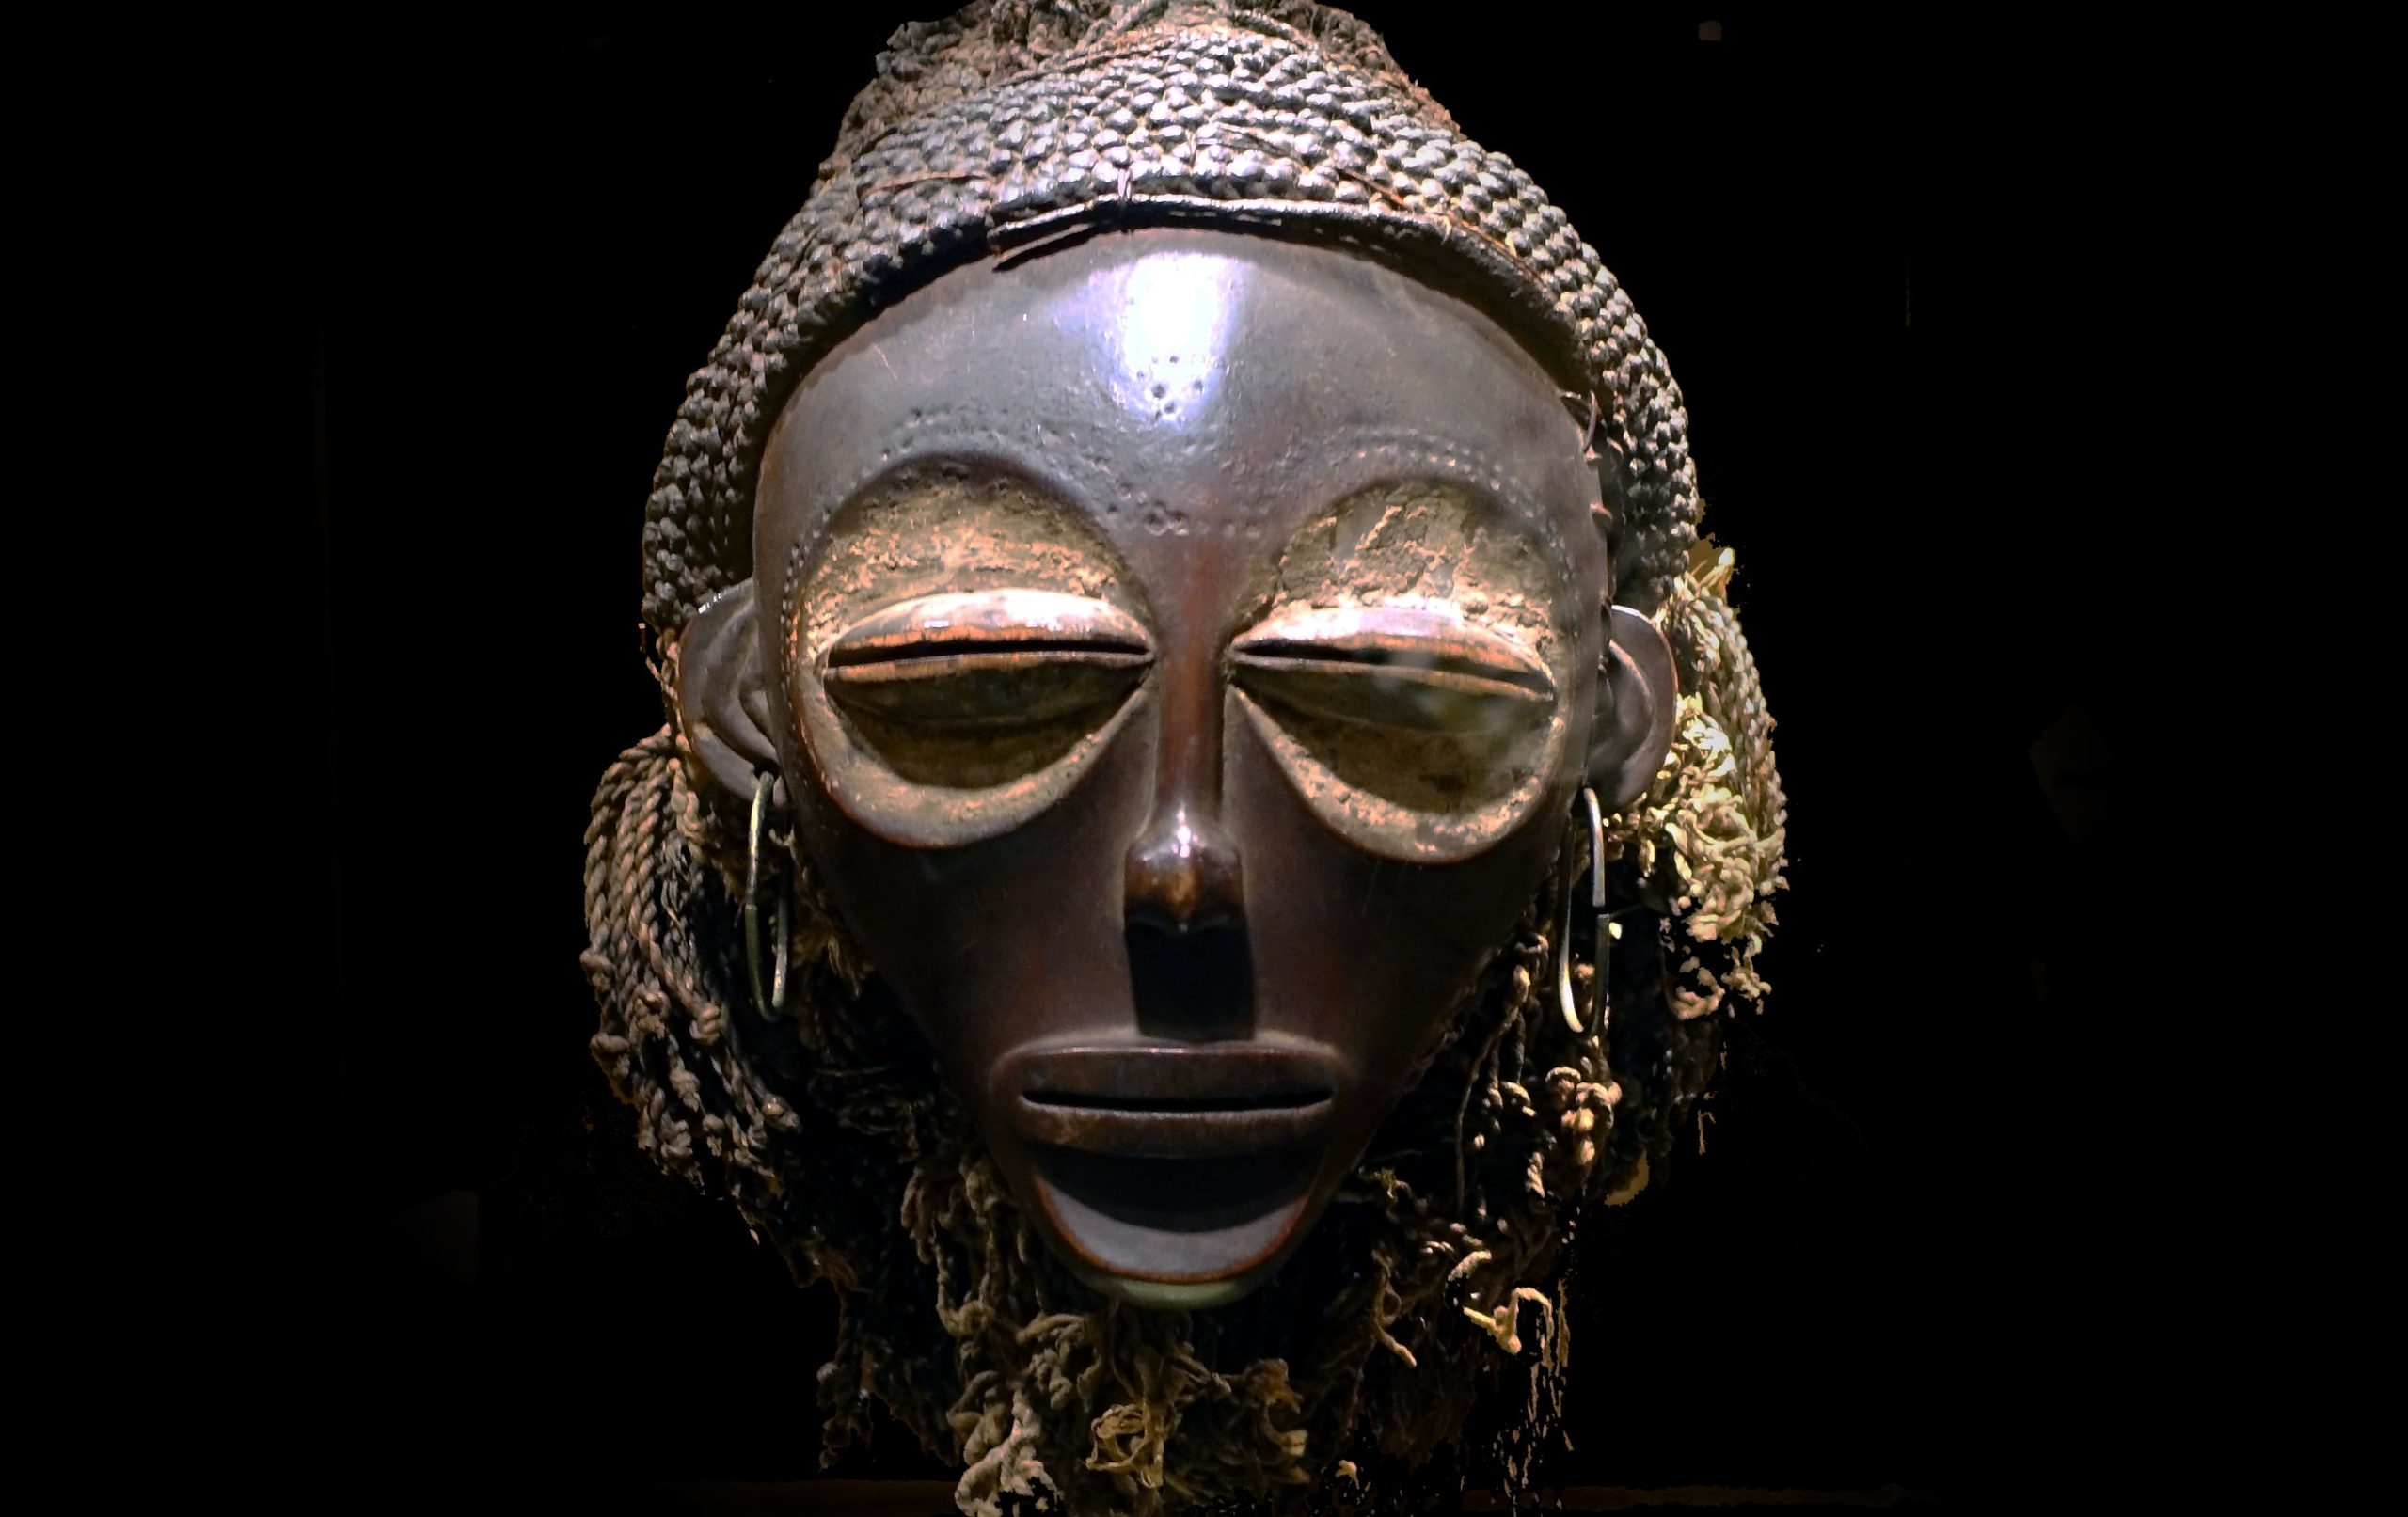 Female (pwo) mask, Chokwe peoples, Democratic Republic of Congo, early 20th century, wood, plant fiber, pigment, copper alloy, 39.1 cm high (Smithsonian National Museum of African Art)